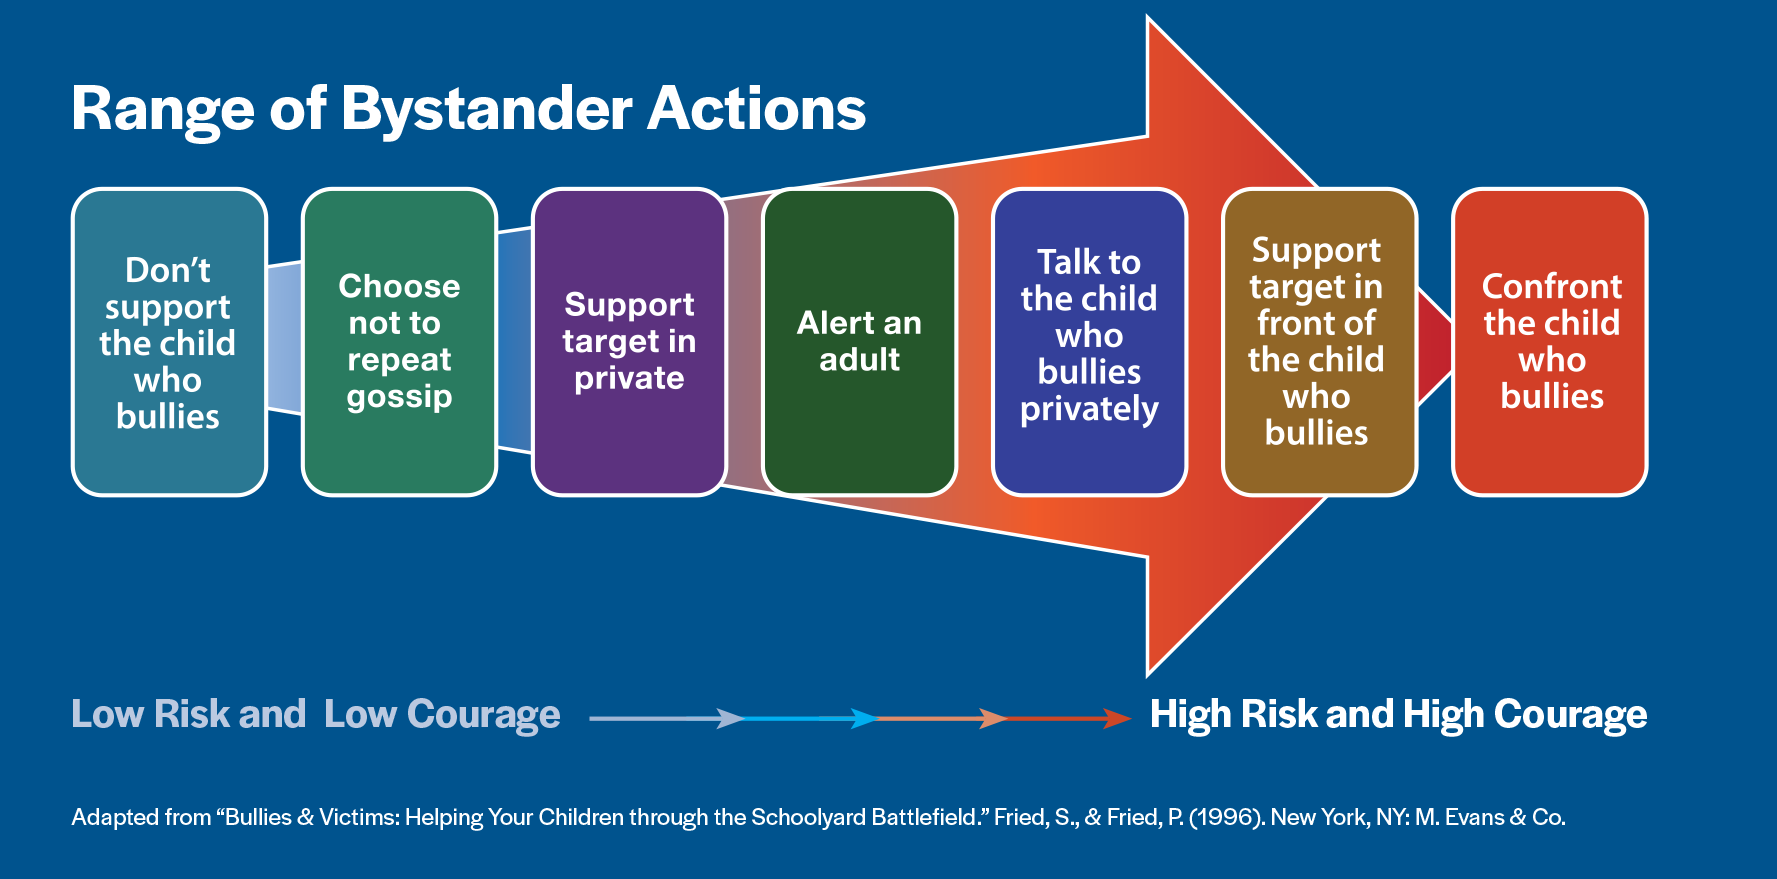 Range of Bystander Actions Chart: 1. Don't support the child who bullies. 2. Choose not to repeat gossip. 3. Support target in private. 4. Alert an adult. 5. Talk to the child who bullies privately. 6. Support target in front of the child who bullies. 7. Confront the child who bullies. 